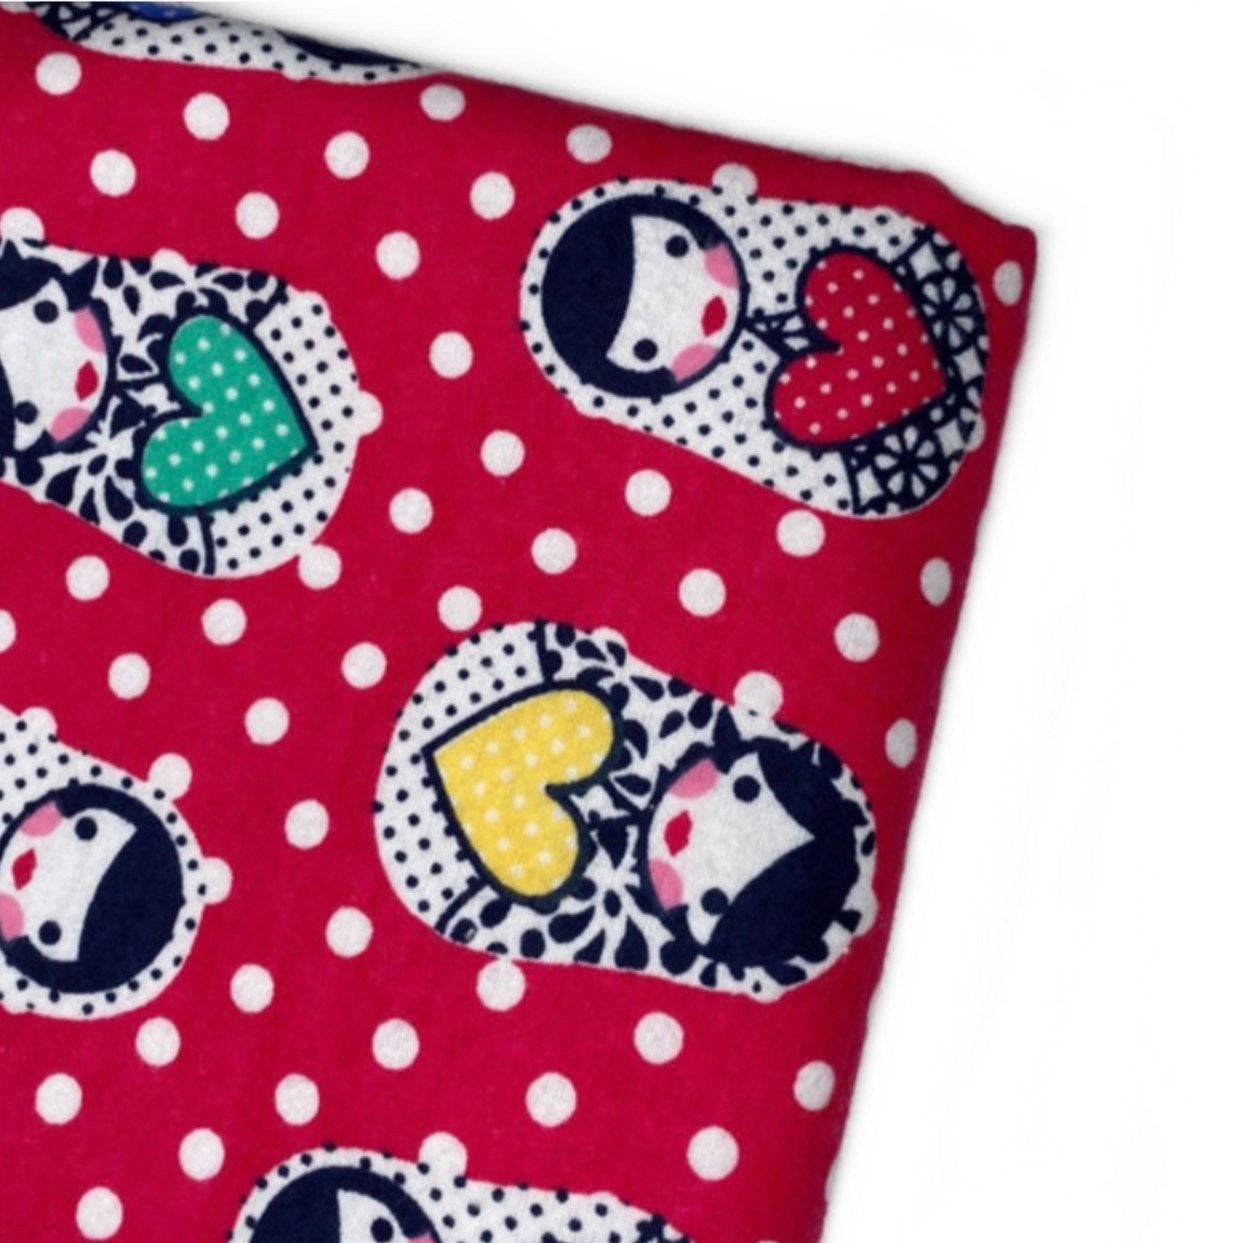 Printed Cotton Flannel - Russian Doll Polka Dot - Pink/White